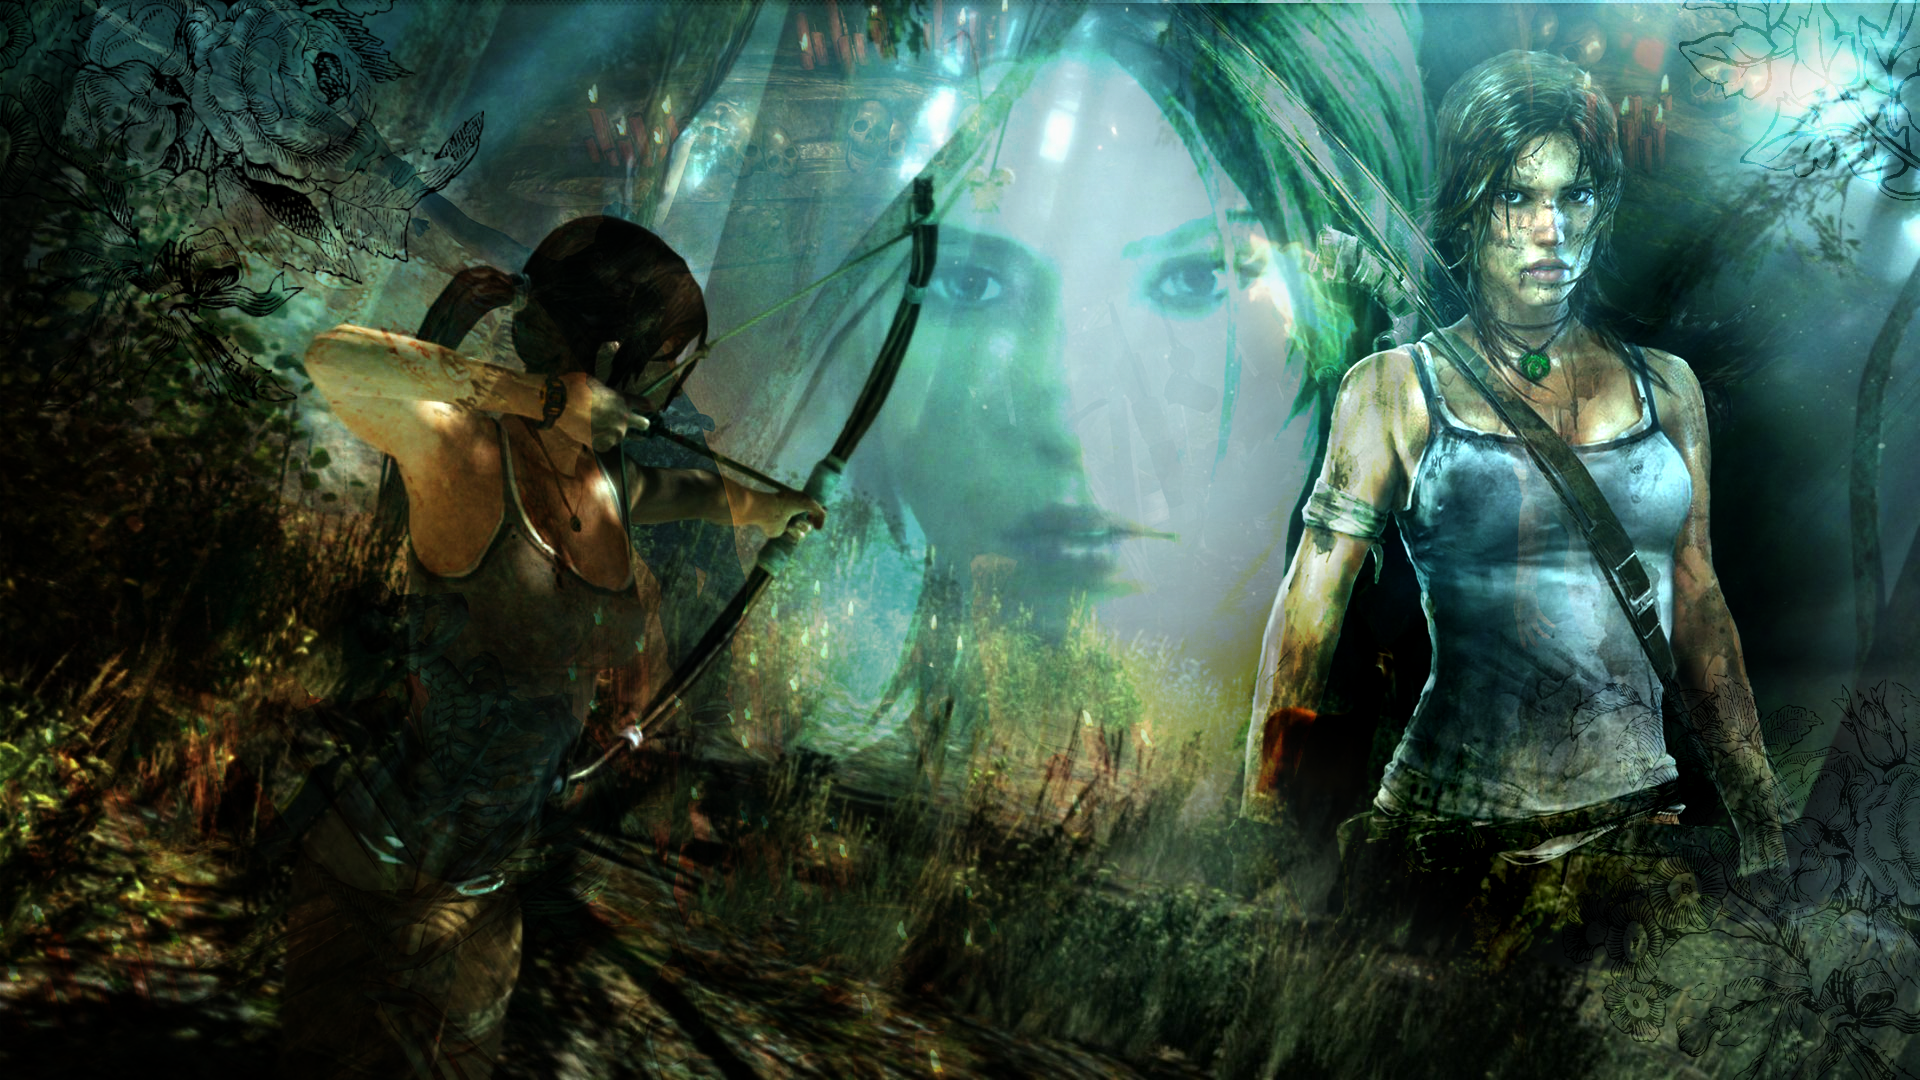 Tomb Raider wallpaper by itsanne on